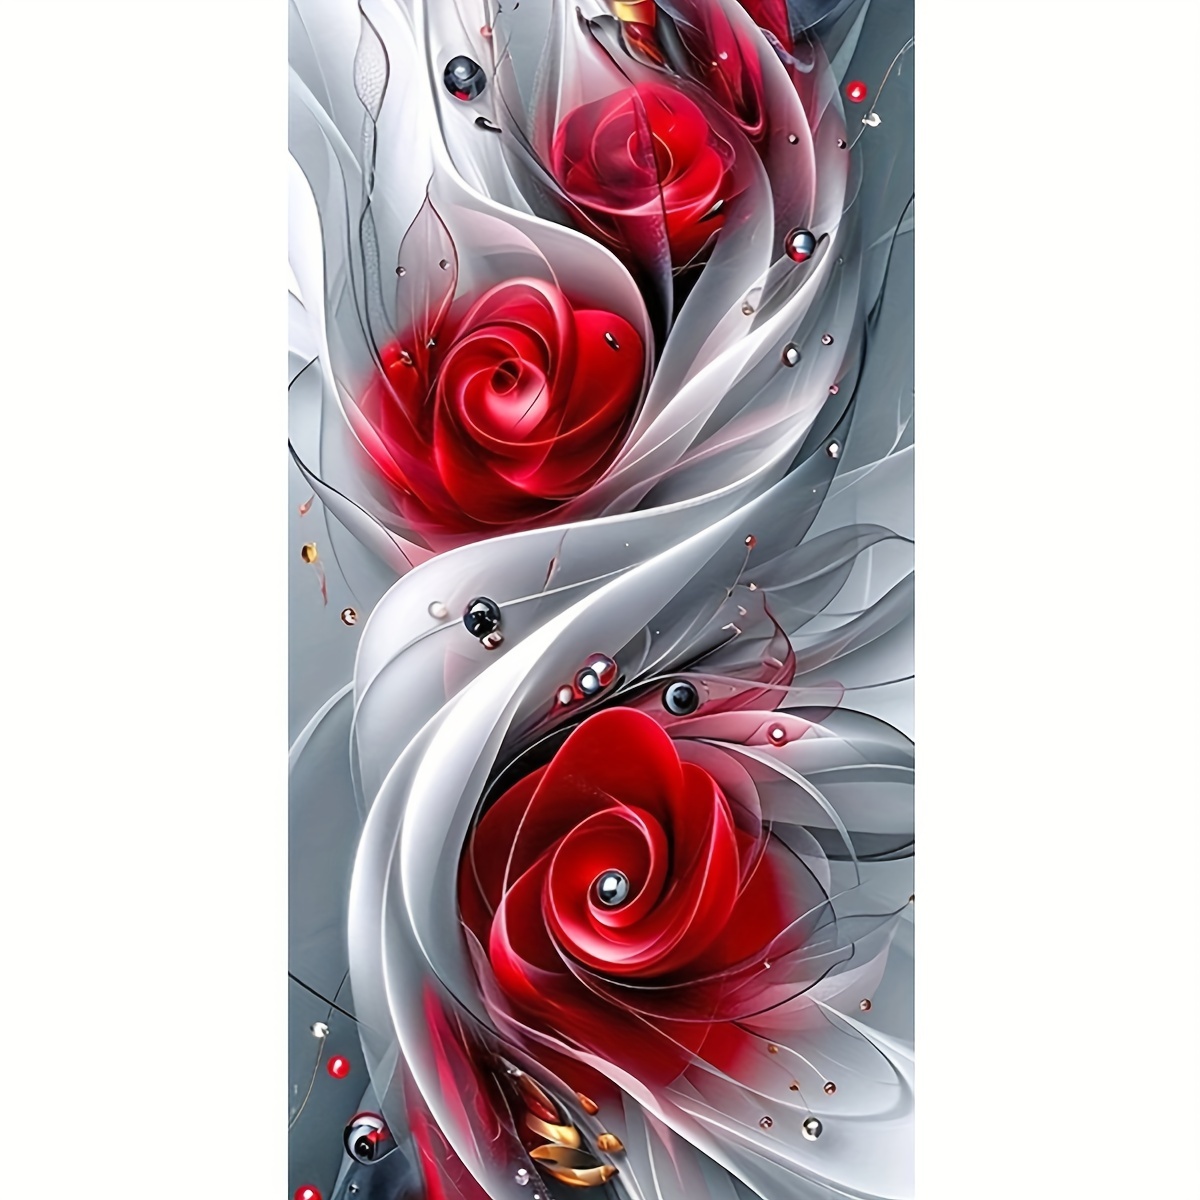 

Large Artistic Floral Pattern Diamond Painting Kit, Diy 5d Mosaic With Full Round Water Drips, Perfect For Home Decor And A High-tech Touch